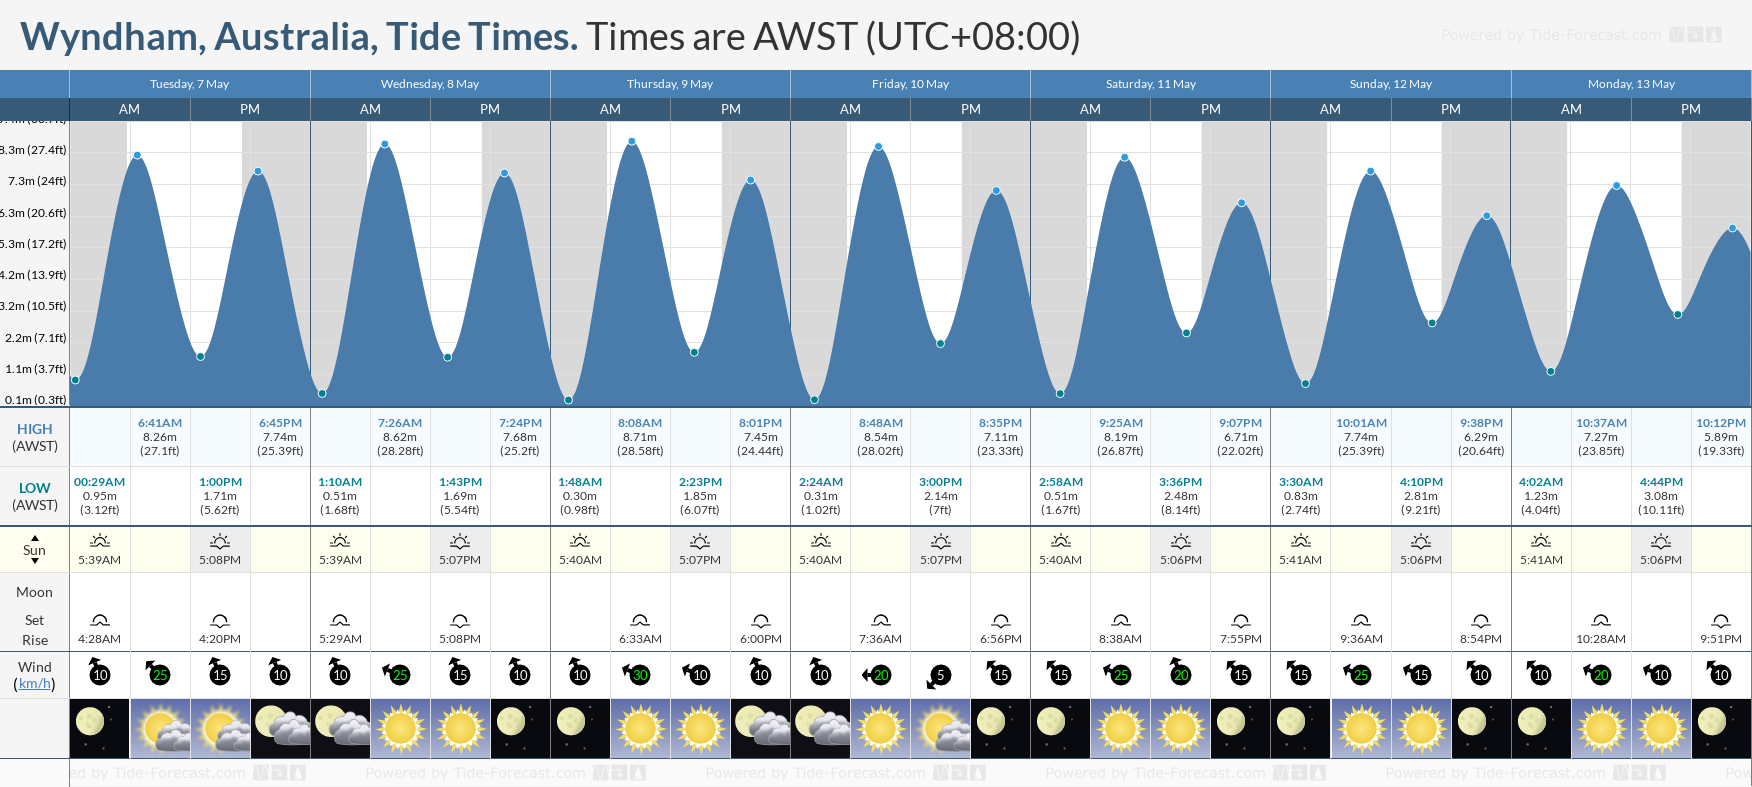 Wyndham, Australia Tide Chart including high and low tide tide times for the next 7 days